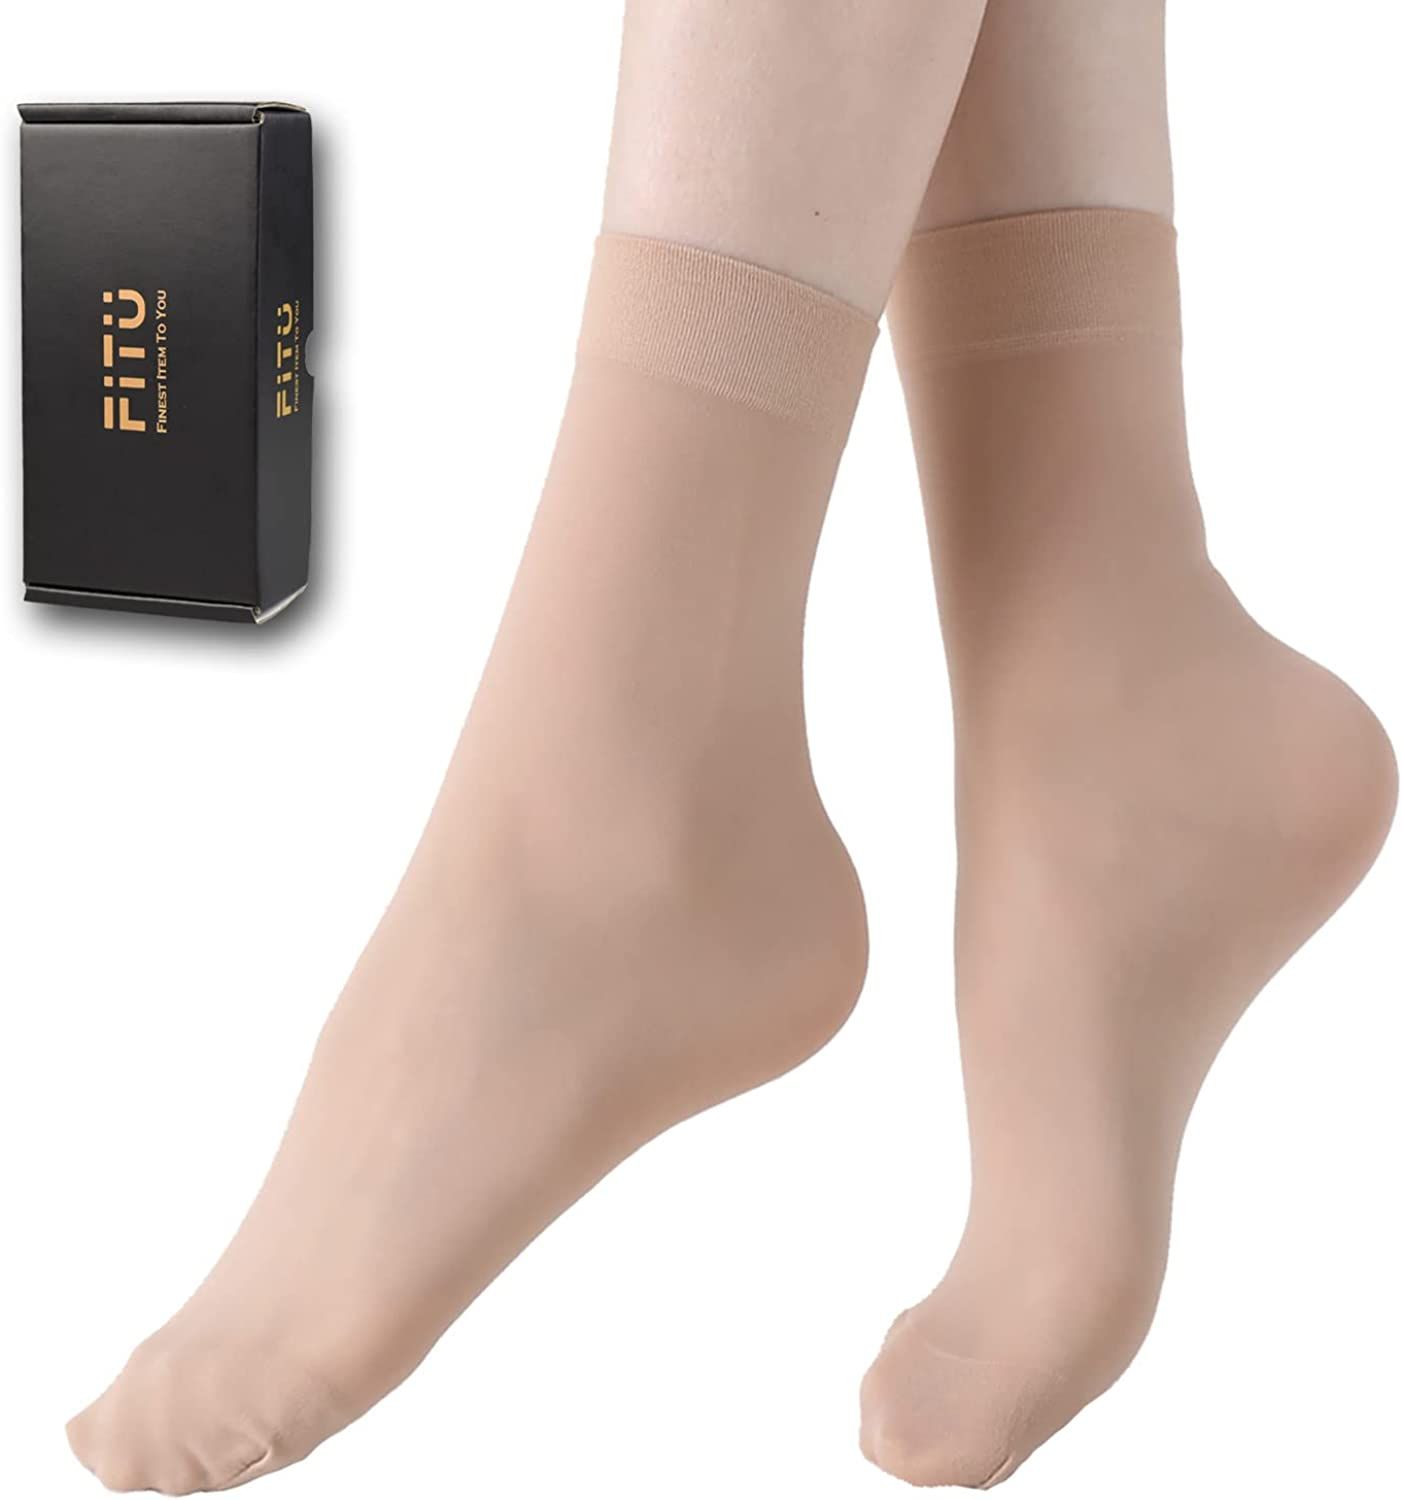 FITU Women's 10-24 Pairs (in Gift Box) Ankle High Sheer Nylon Socks Soft Tight Hosiery with Reinf... | Amazon (US)